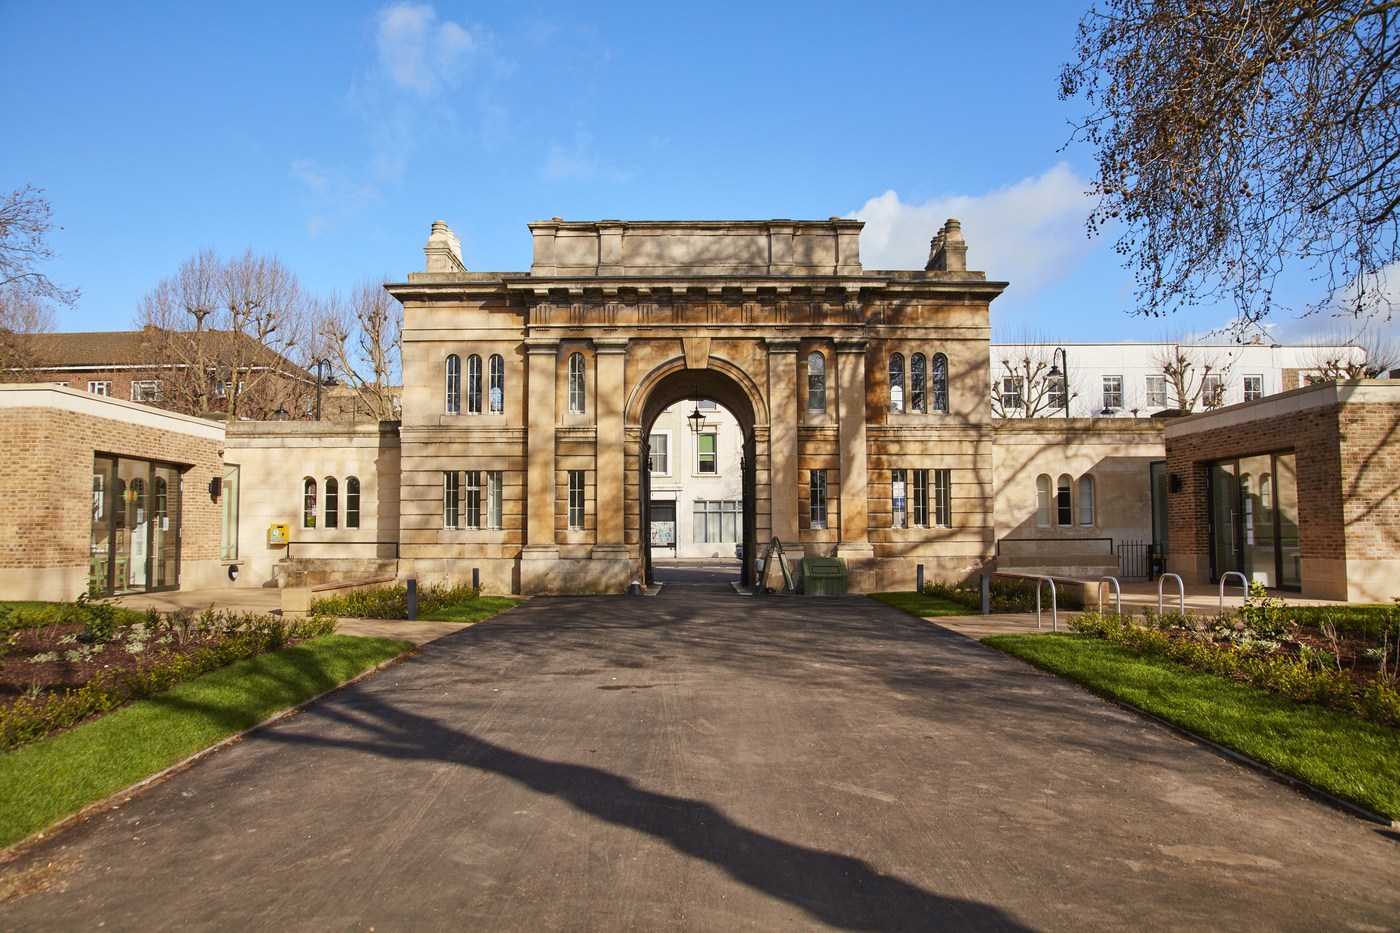 North Lodge in Brompton Cemetery